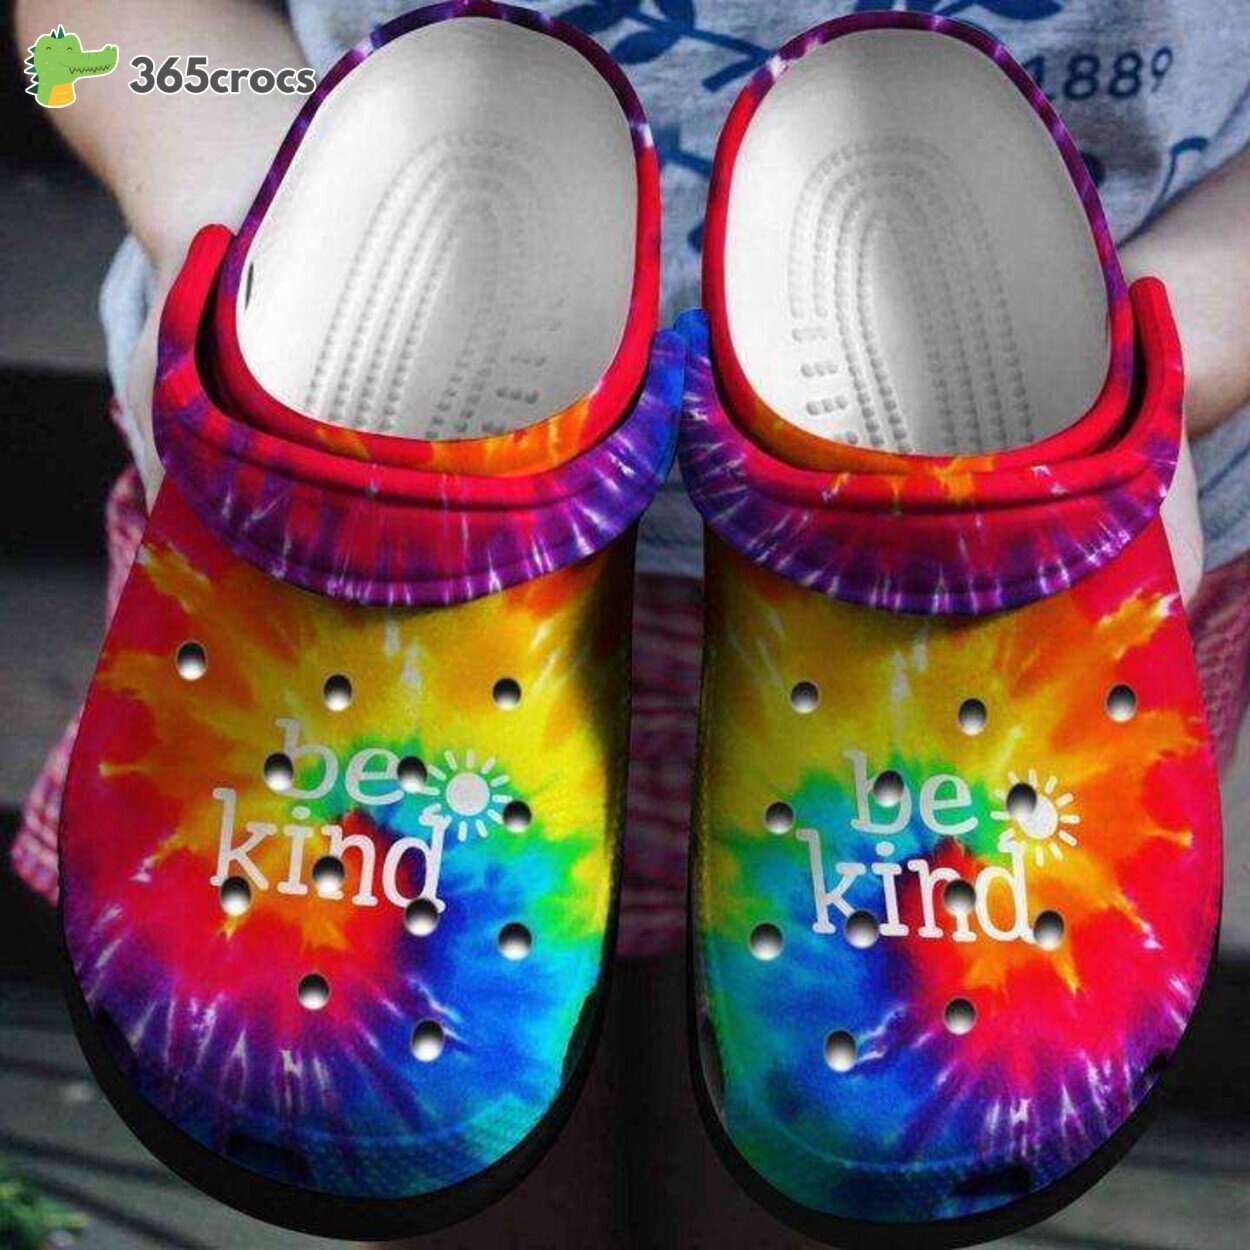 Dive into Positivity Spread Kindness with Cool Tie Dye Comfort Clog Shoes